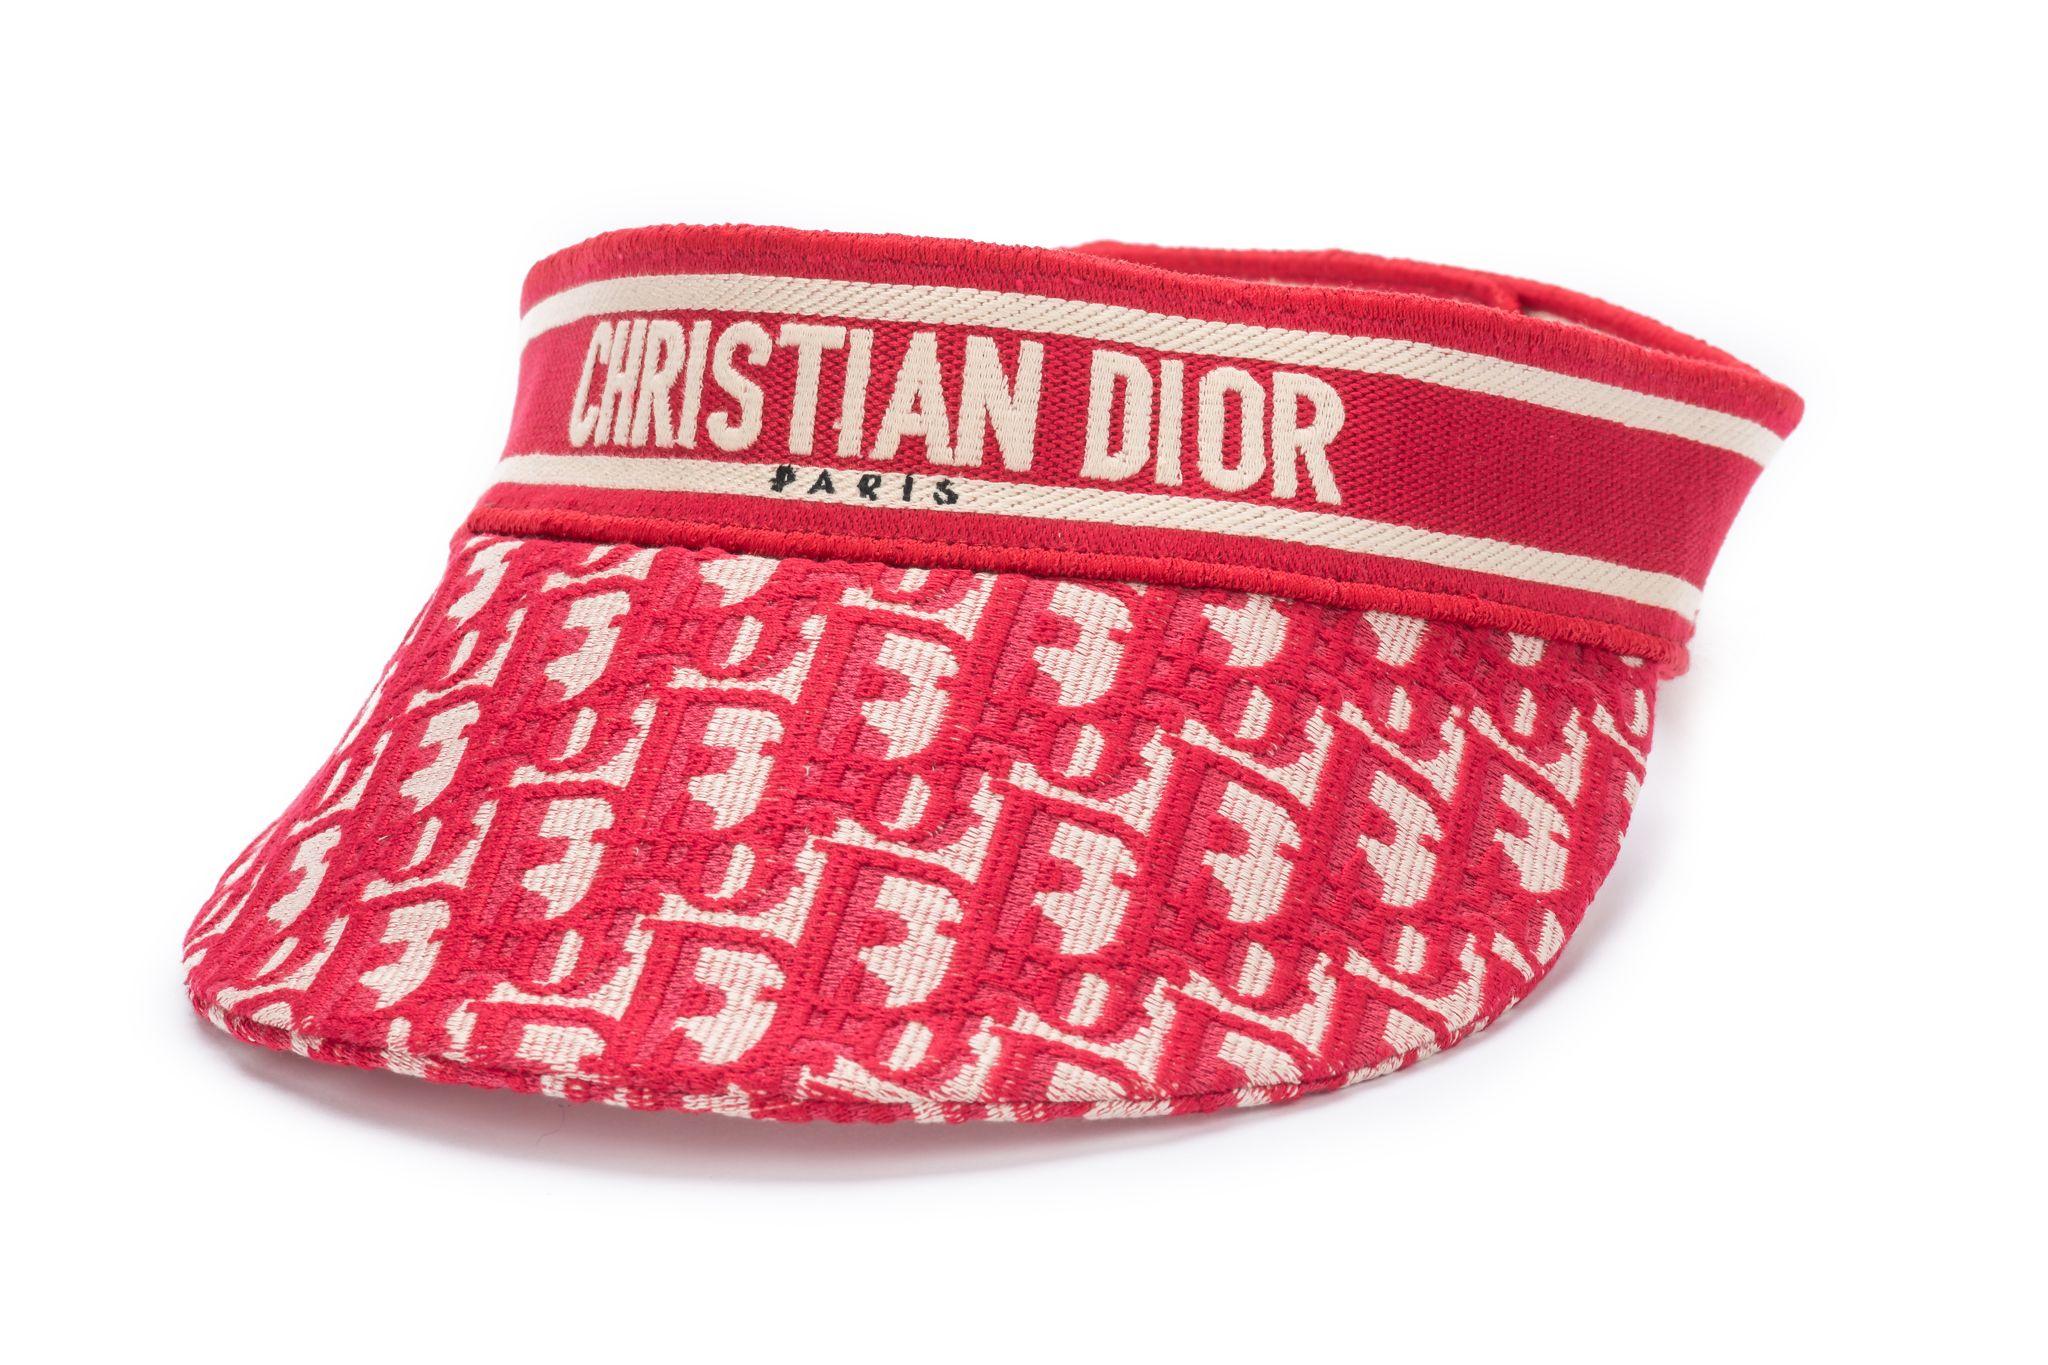 Red Christian Dior Oblique motif visor. Featuring a tonal embroidered band with 'CHRISTIAN DIOR PARIS' signature. It's new and comes with original dustcover.